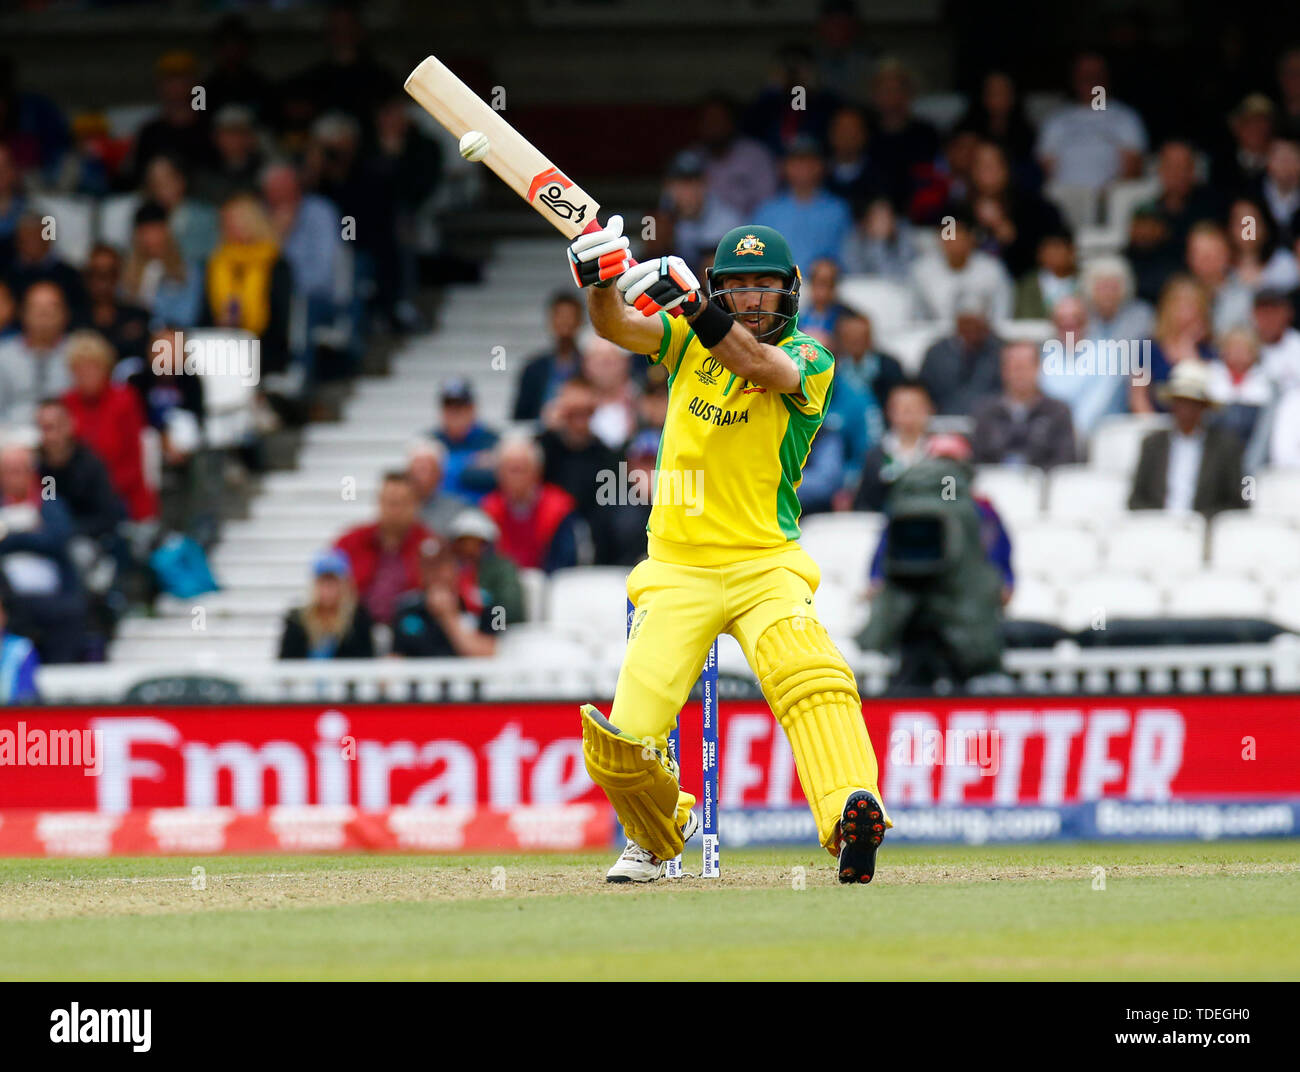 London, UK. 15th June, 2019. LONDON, England. June 15: Glenn Maxwell of Australia during ICC Cricket World Cup between Sri Lanka and Australia at the Oval Stadium on 15 June 2019 in London, England. Credit: Action Foto Sport/Alamy Live News Stock Photo